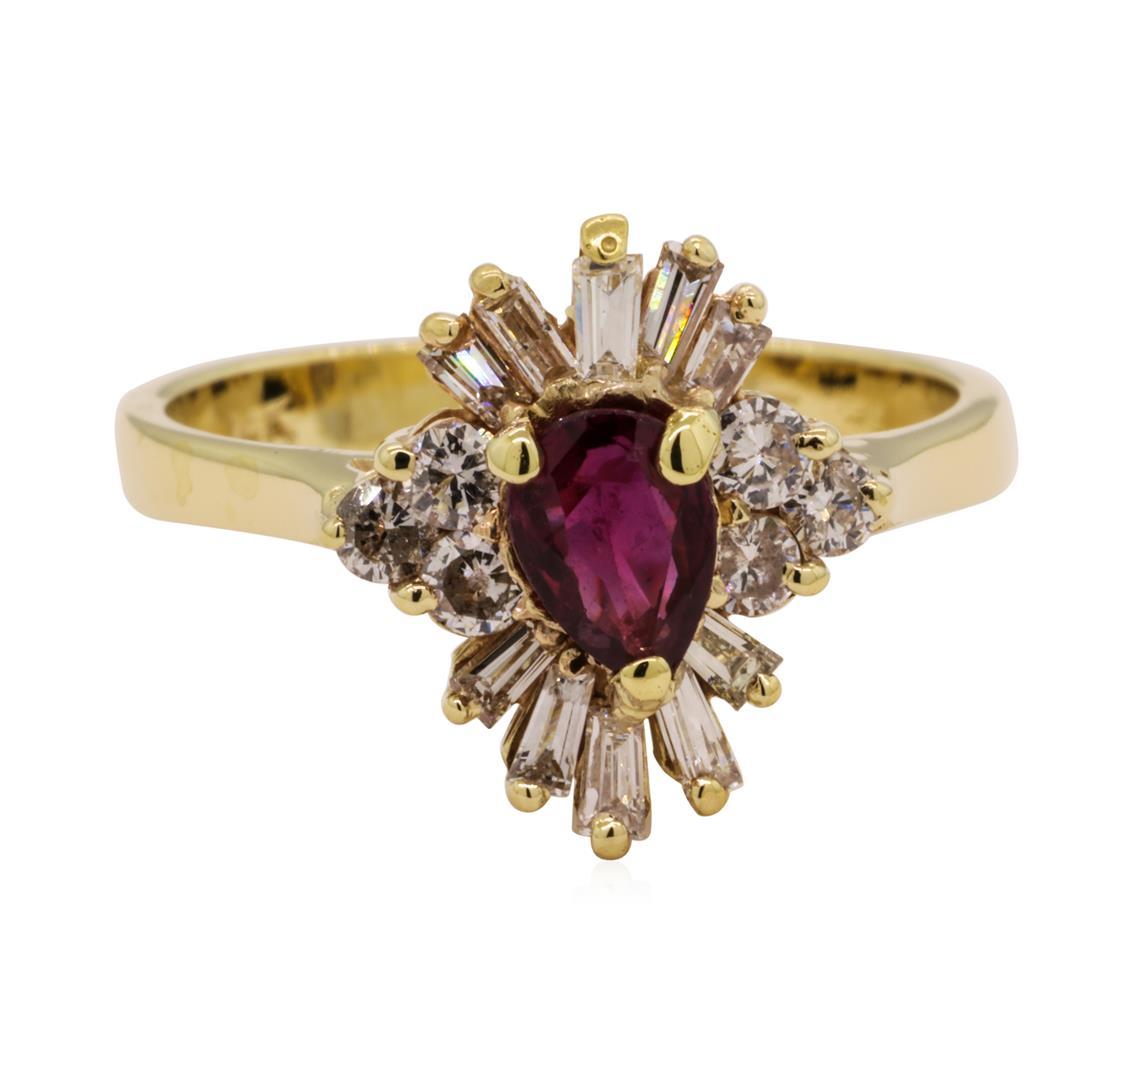 0.40 ctw Ruby and Diamond Ring - 14KT Yellow Gold